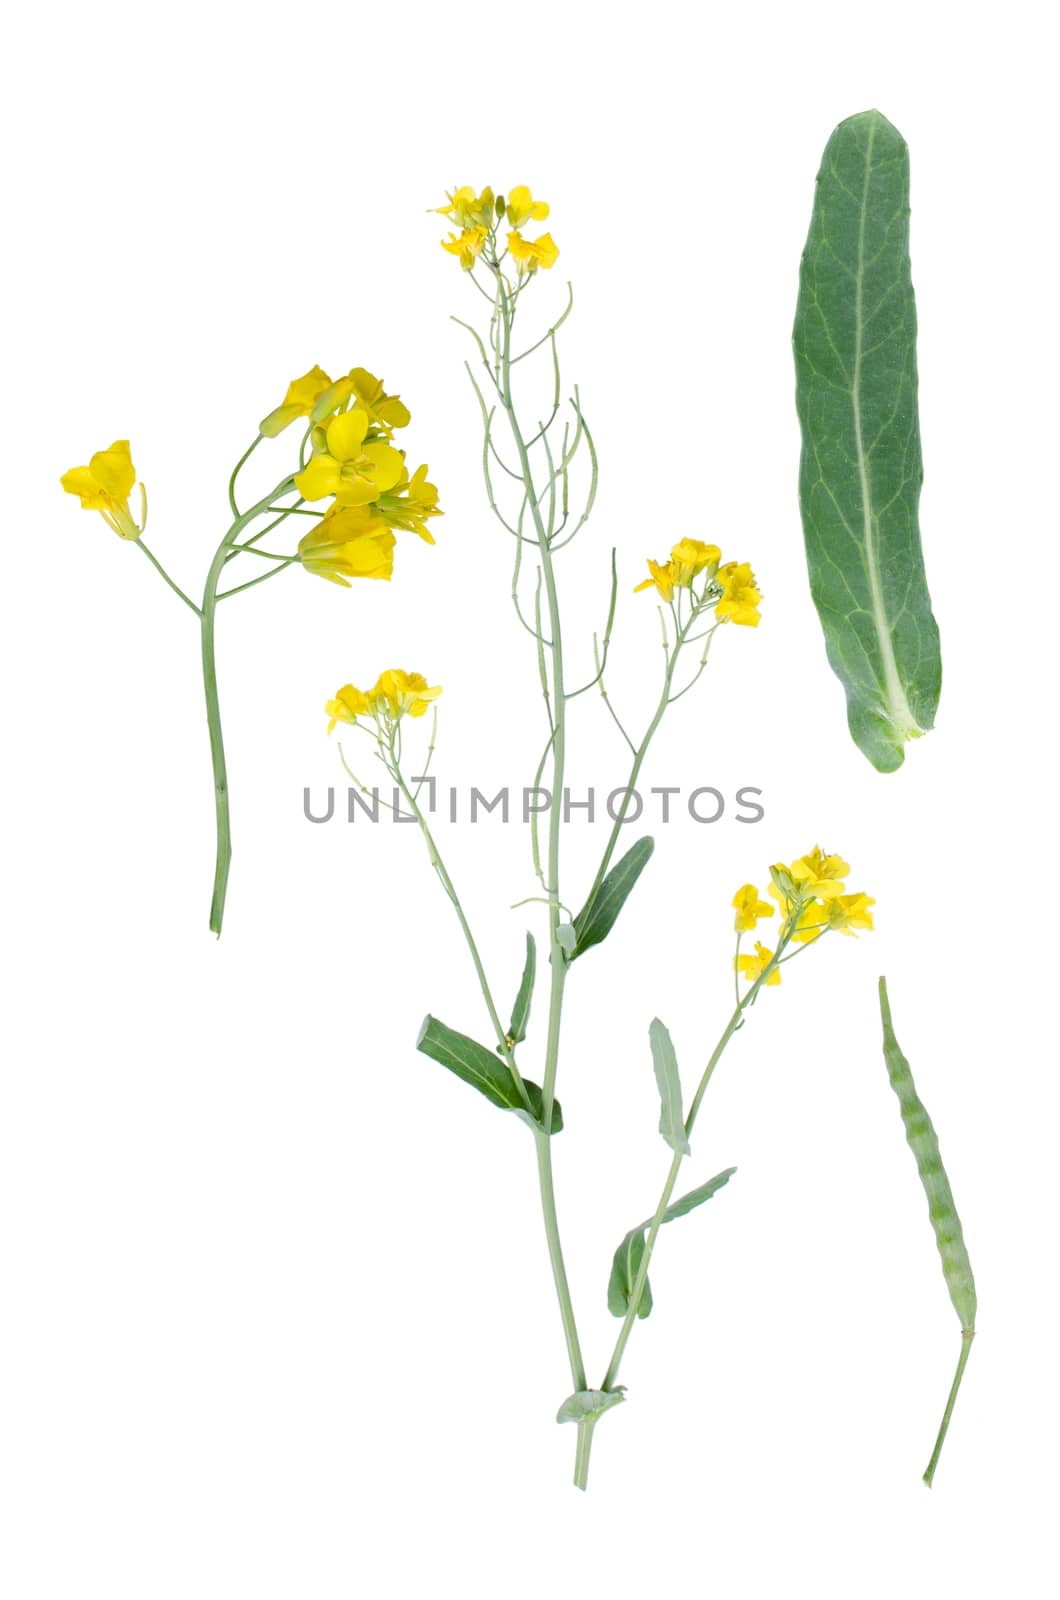 Hare's ear mustard isolated on white background with three details beside.